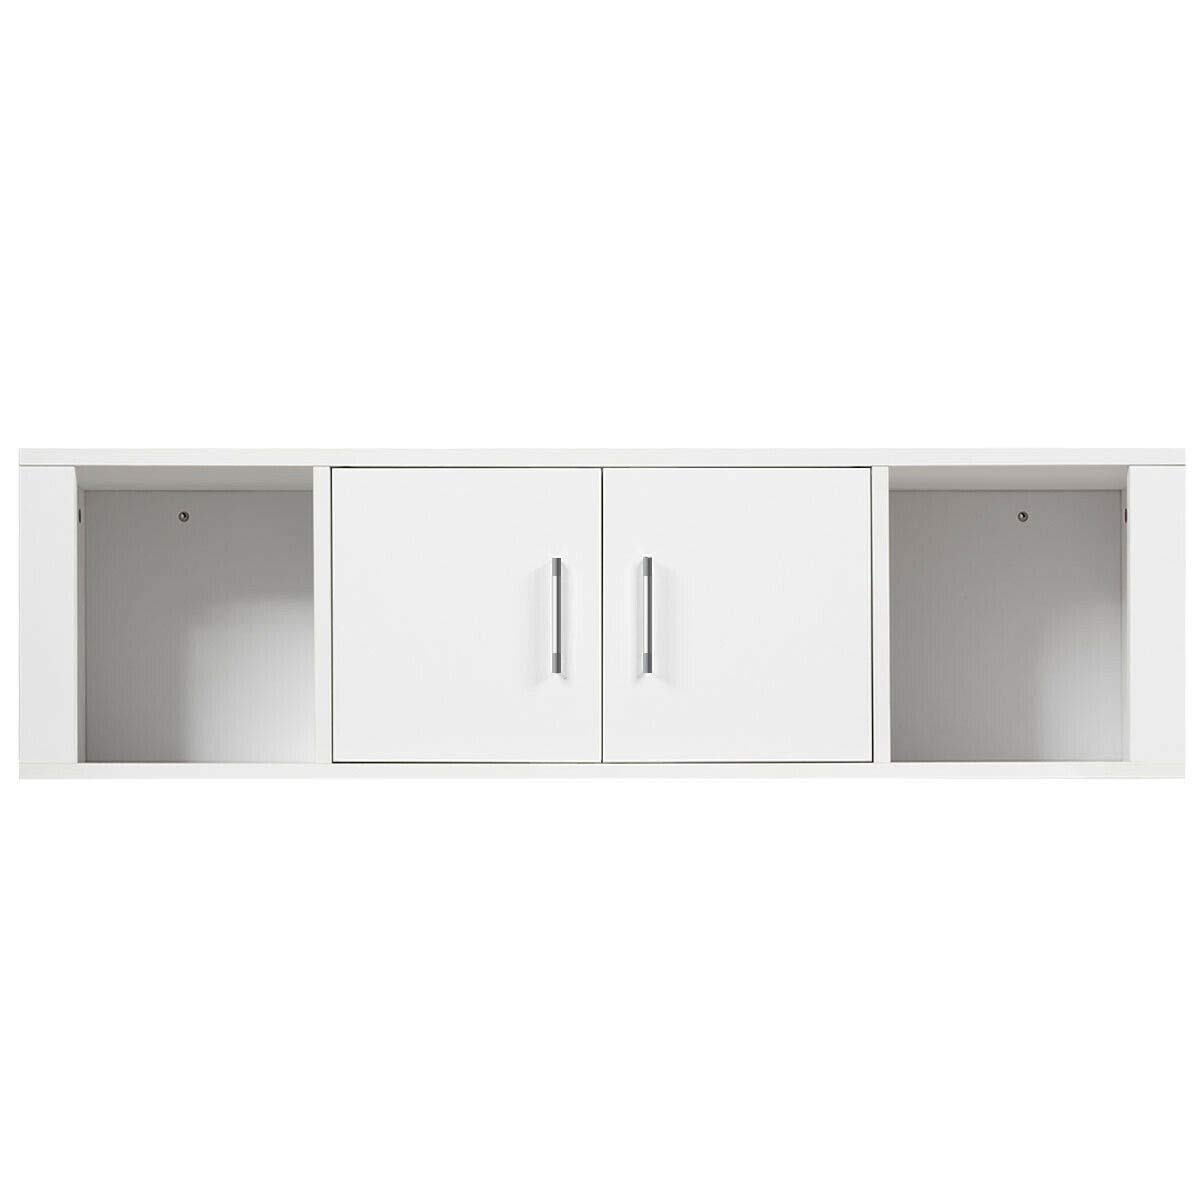 King77777 White Durable Compact Space Saver Wall Mounted Floating 2 Door Desk Hutch Storage Shelves Furniture